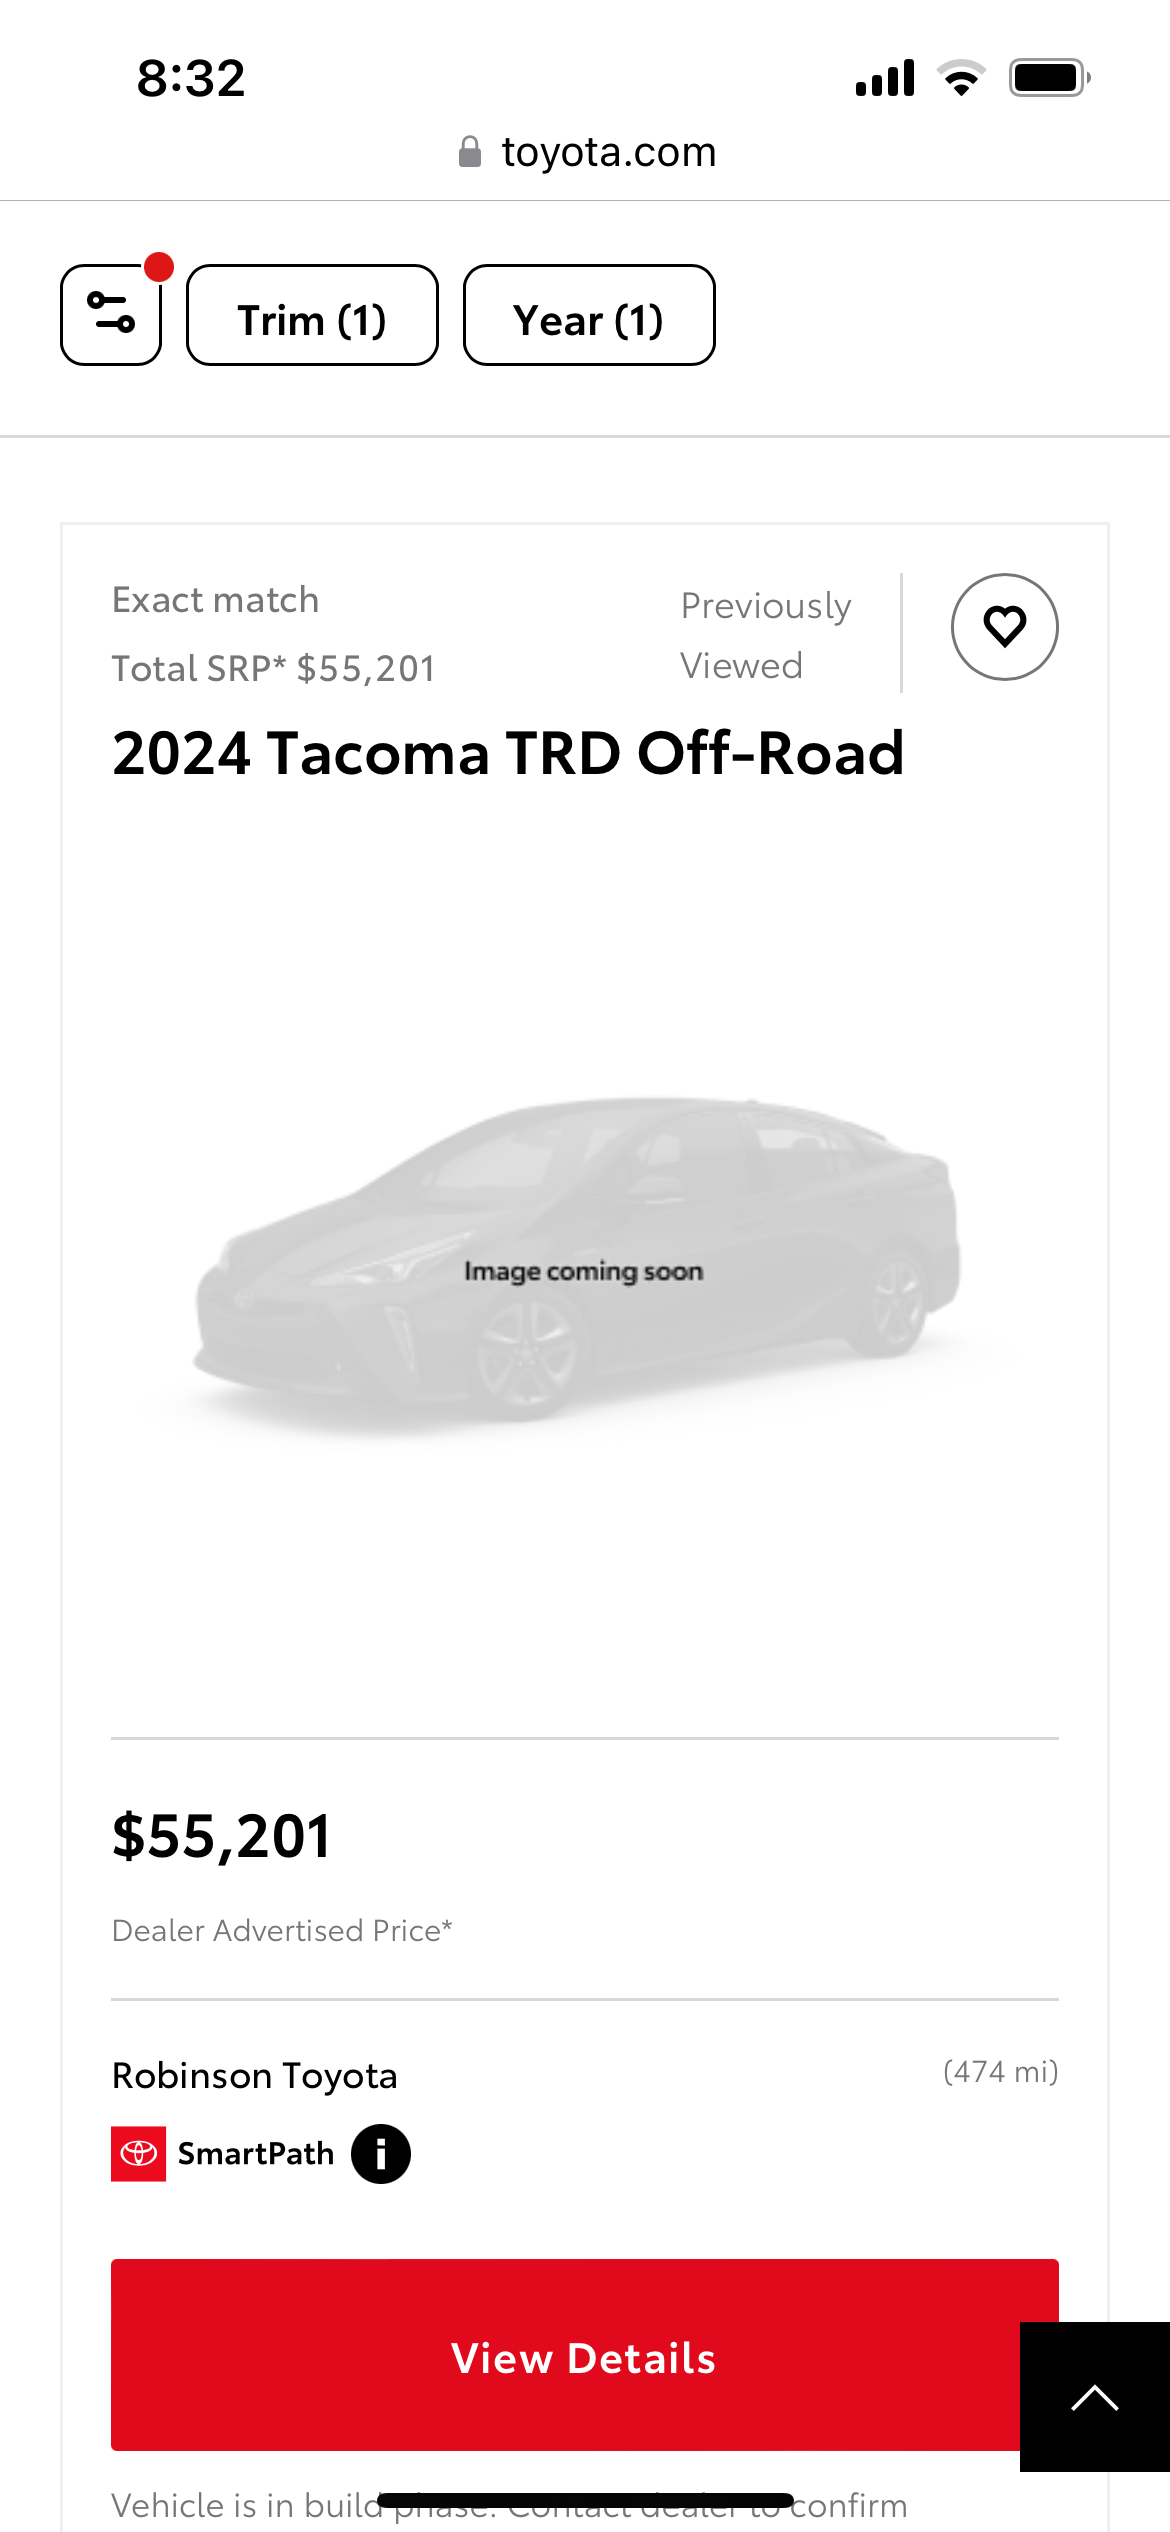 2024 Tacoma Edited. First 2024 TRD Off-Road showed up in pending dealer inventory IMG_4004